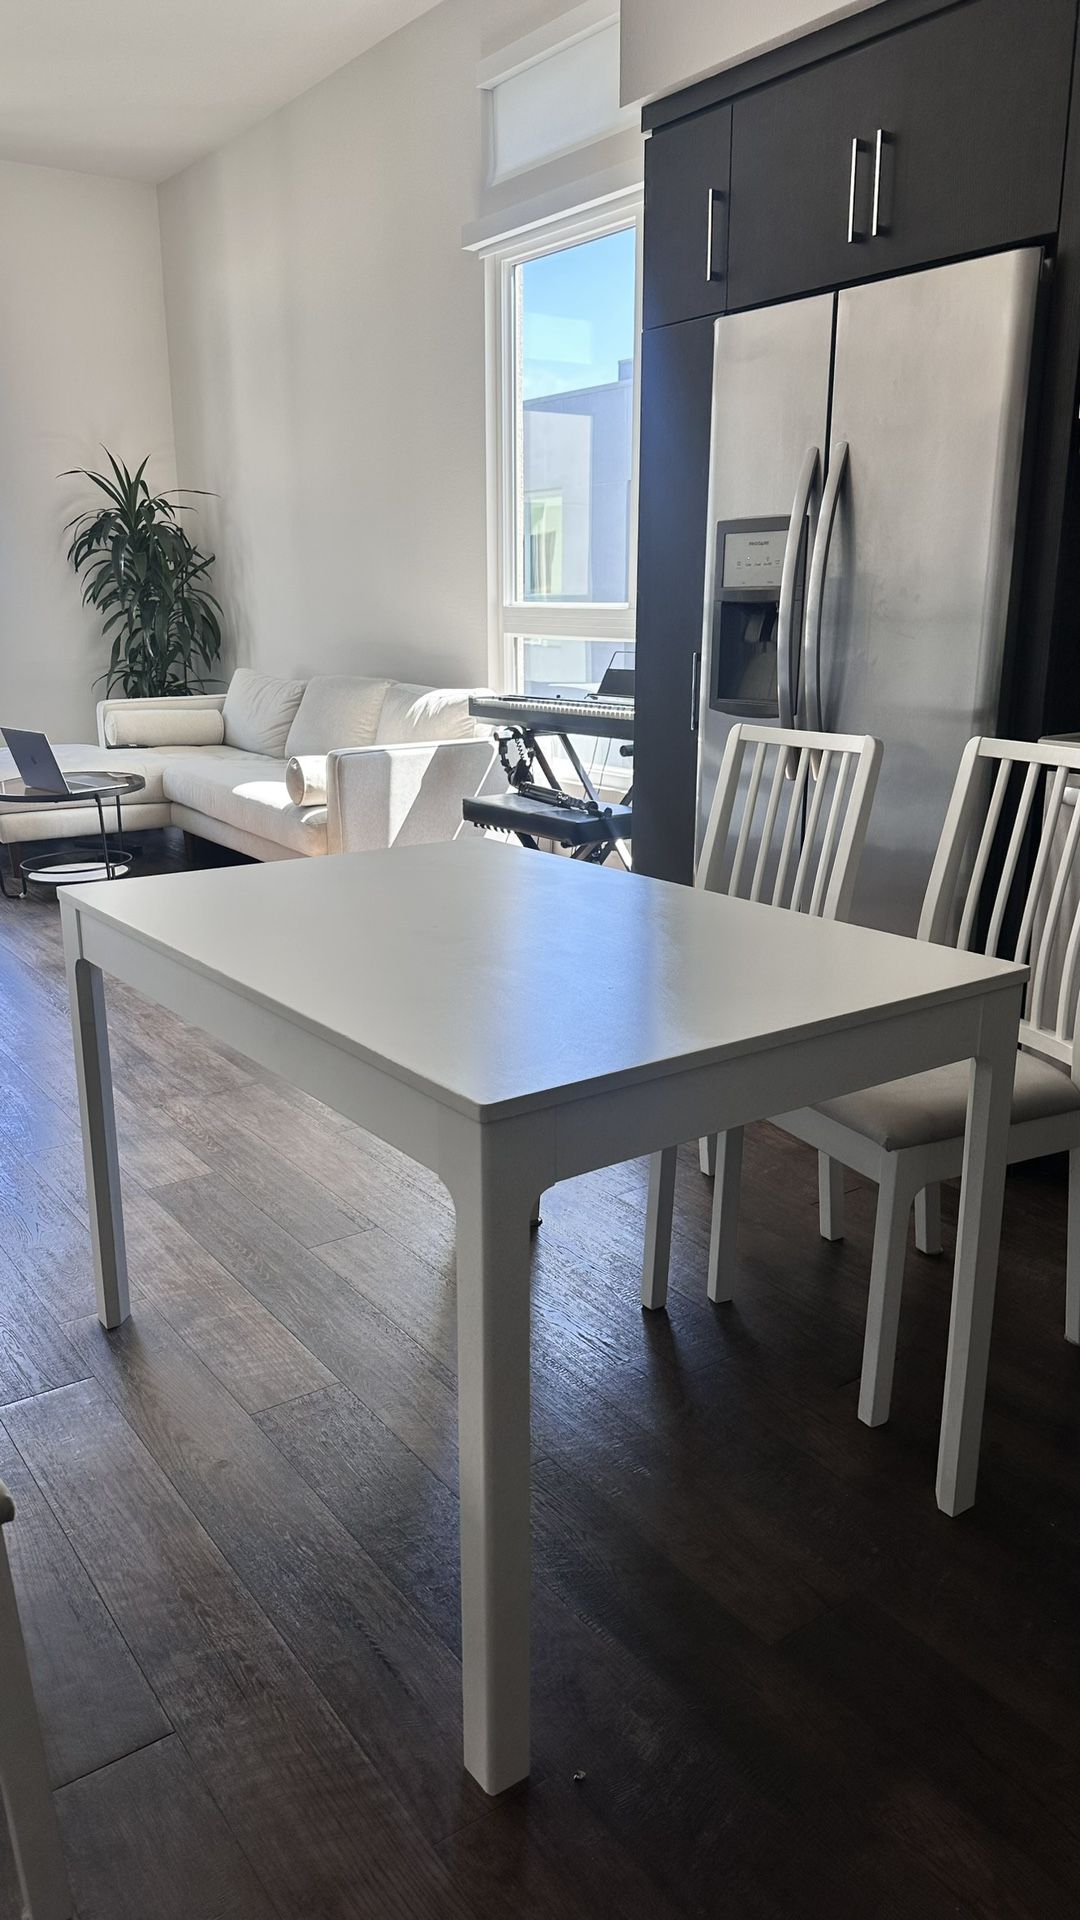 Dining table for the kitchen, white, in good  condition. From Ikea.